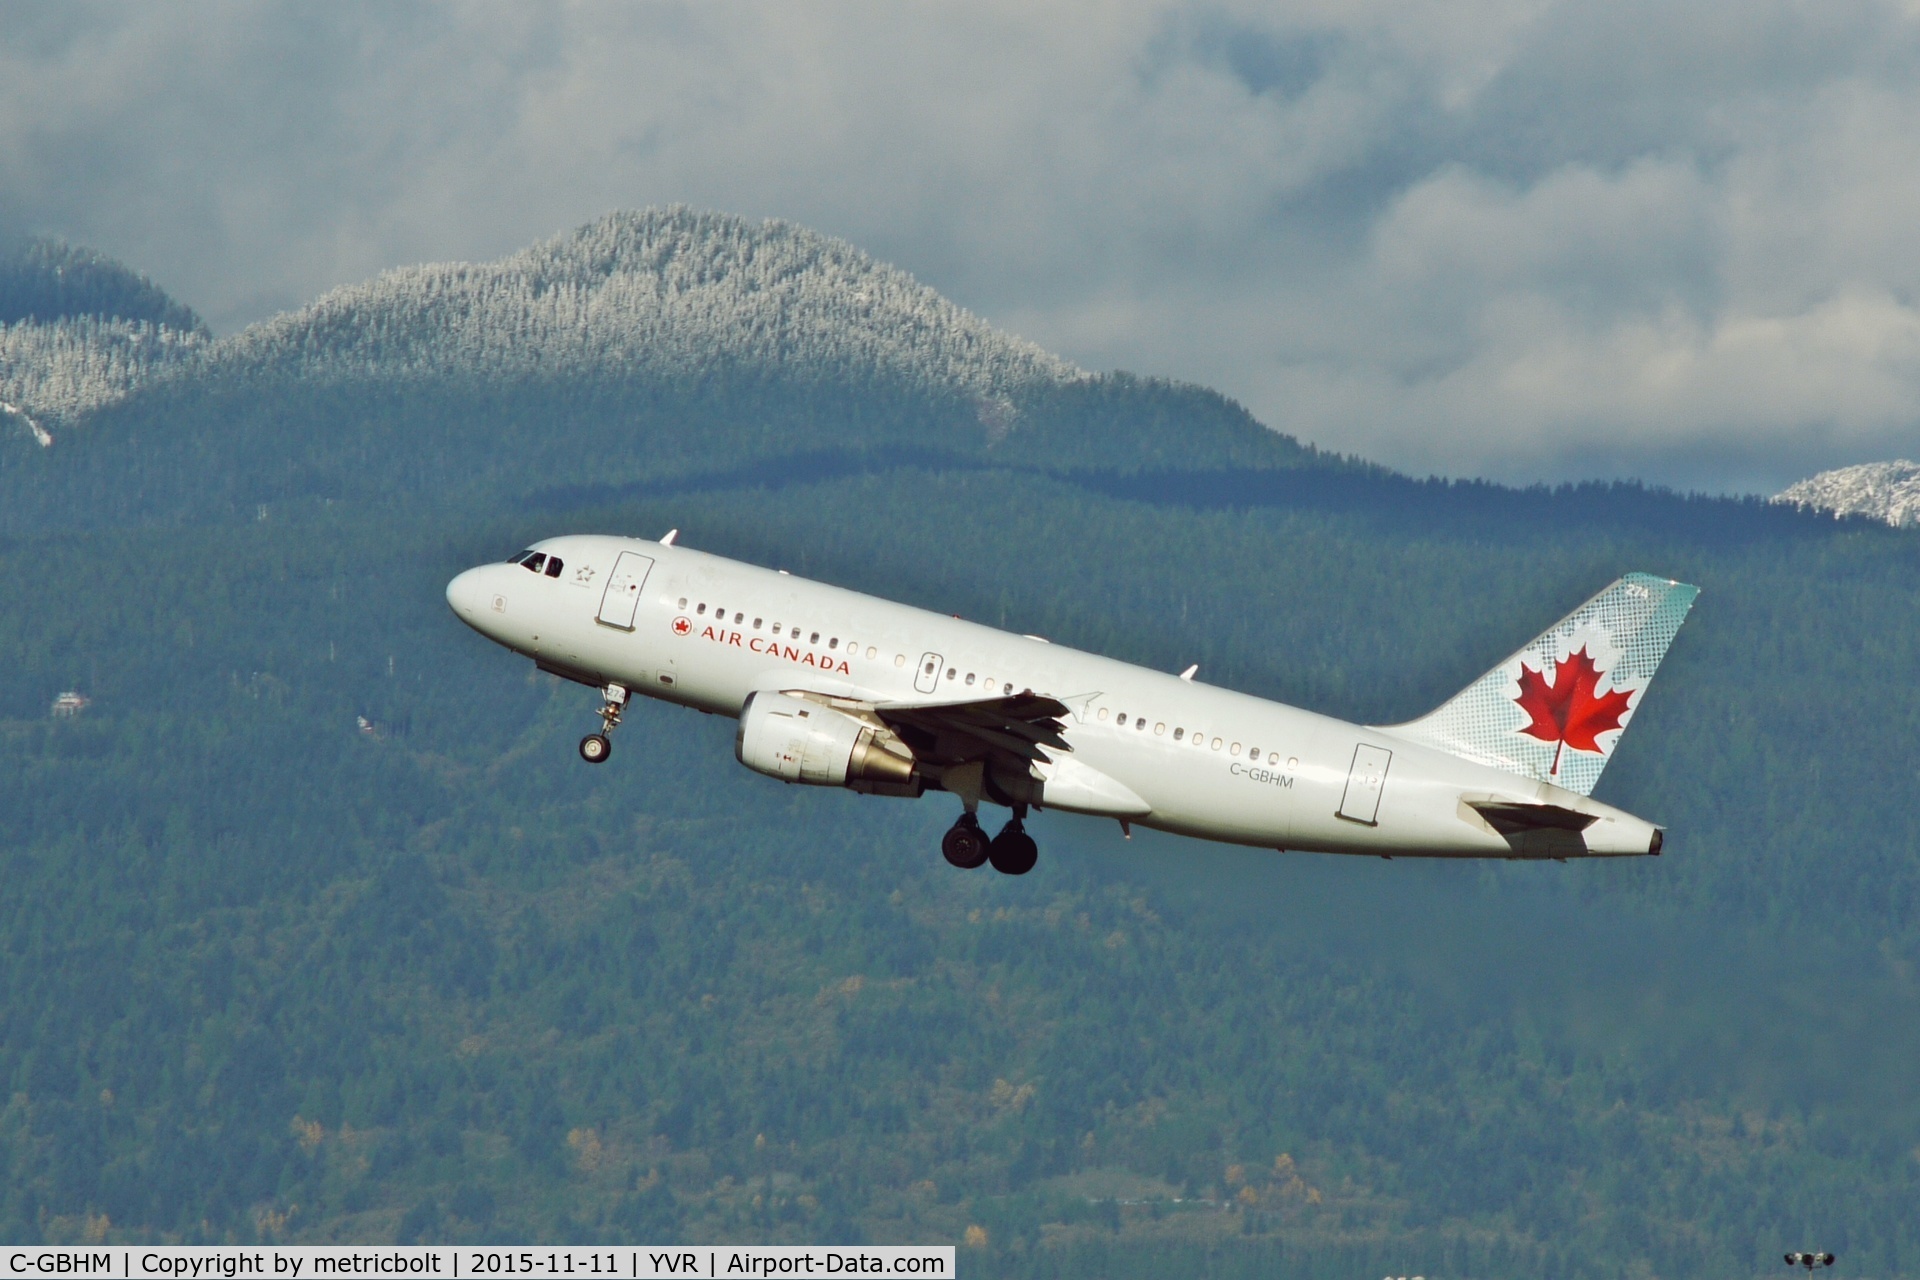 C-GBHM, 1997 Airbus A319-114 C/N 769, Departure from YVR.
Canadian elections over, 